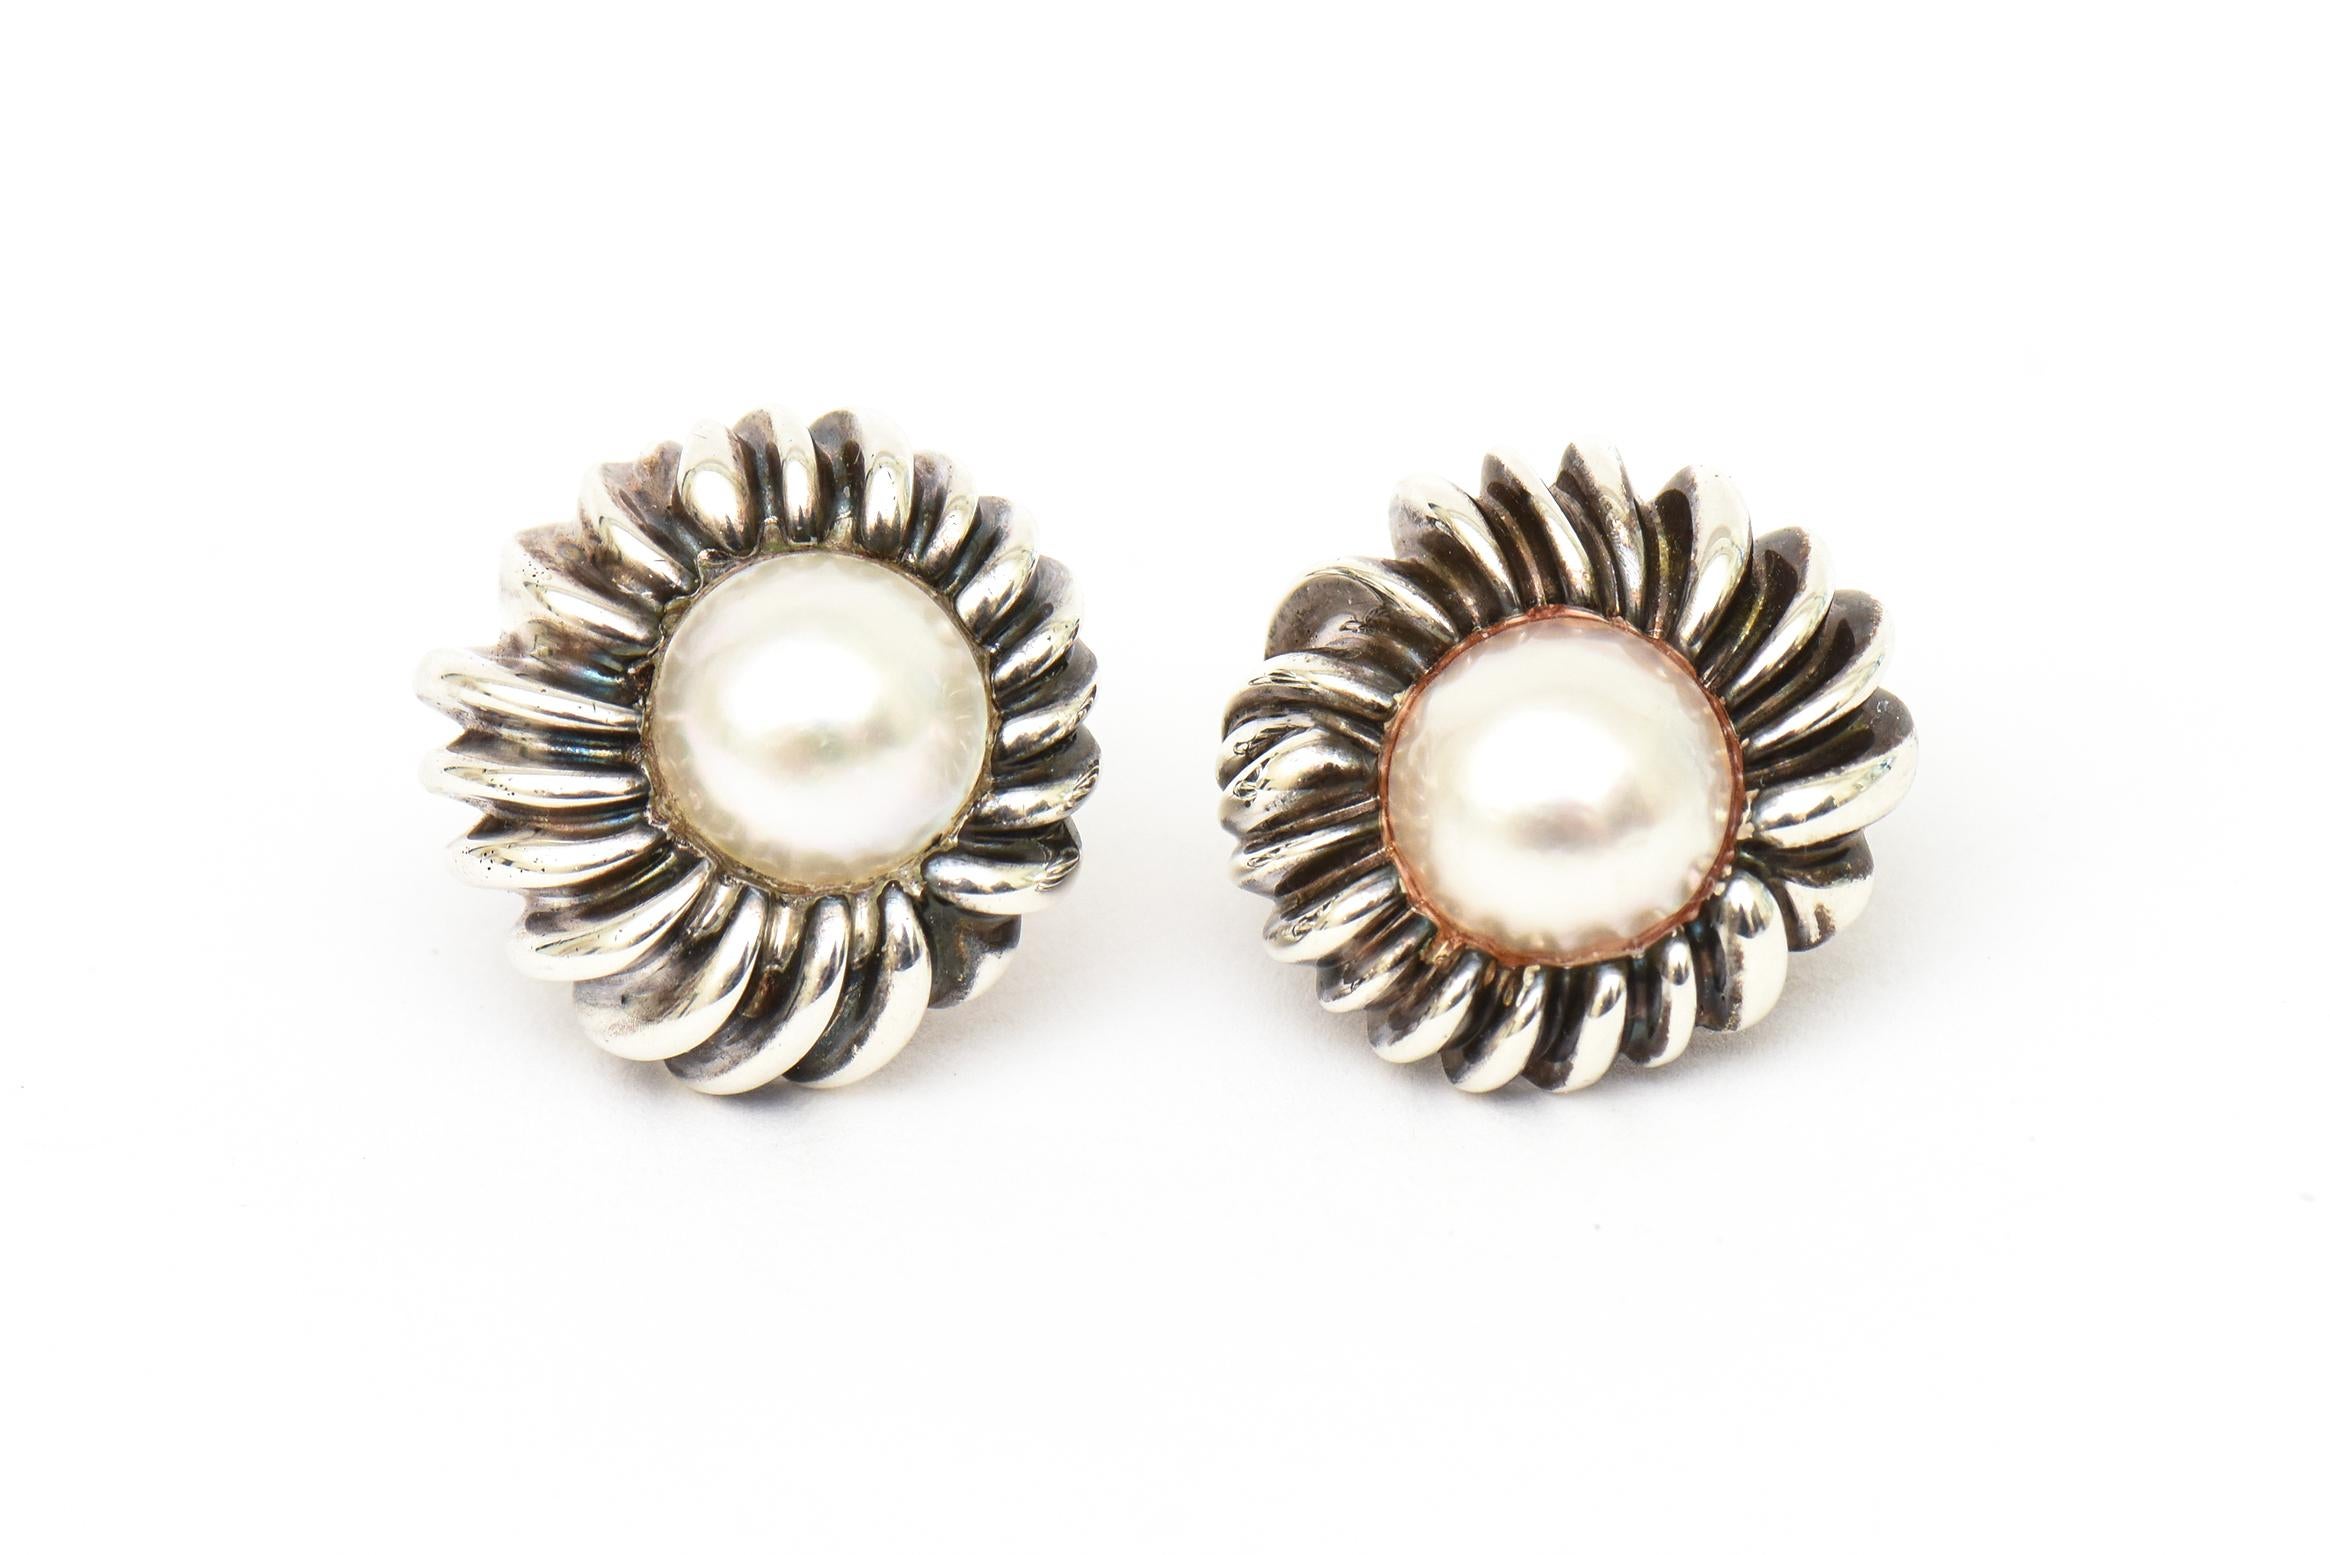 These classic and stunning vintage Tiffany and Co. hallmarked sterling silver and Mabe pearl lever back earrings can go day to evening. Hallmarked Tiffany &Co. Sterling. From the late 60's or early 70's. They have a perimeter sterling form with a